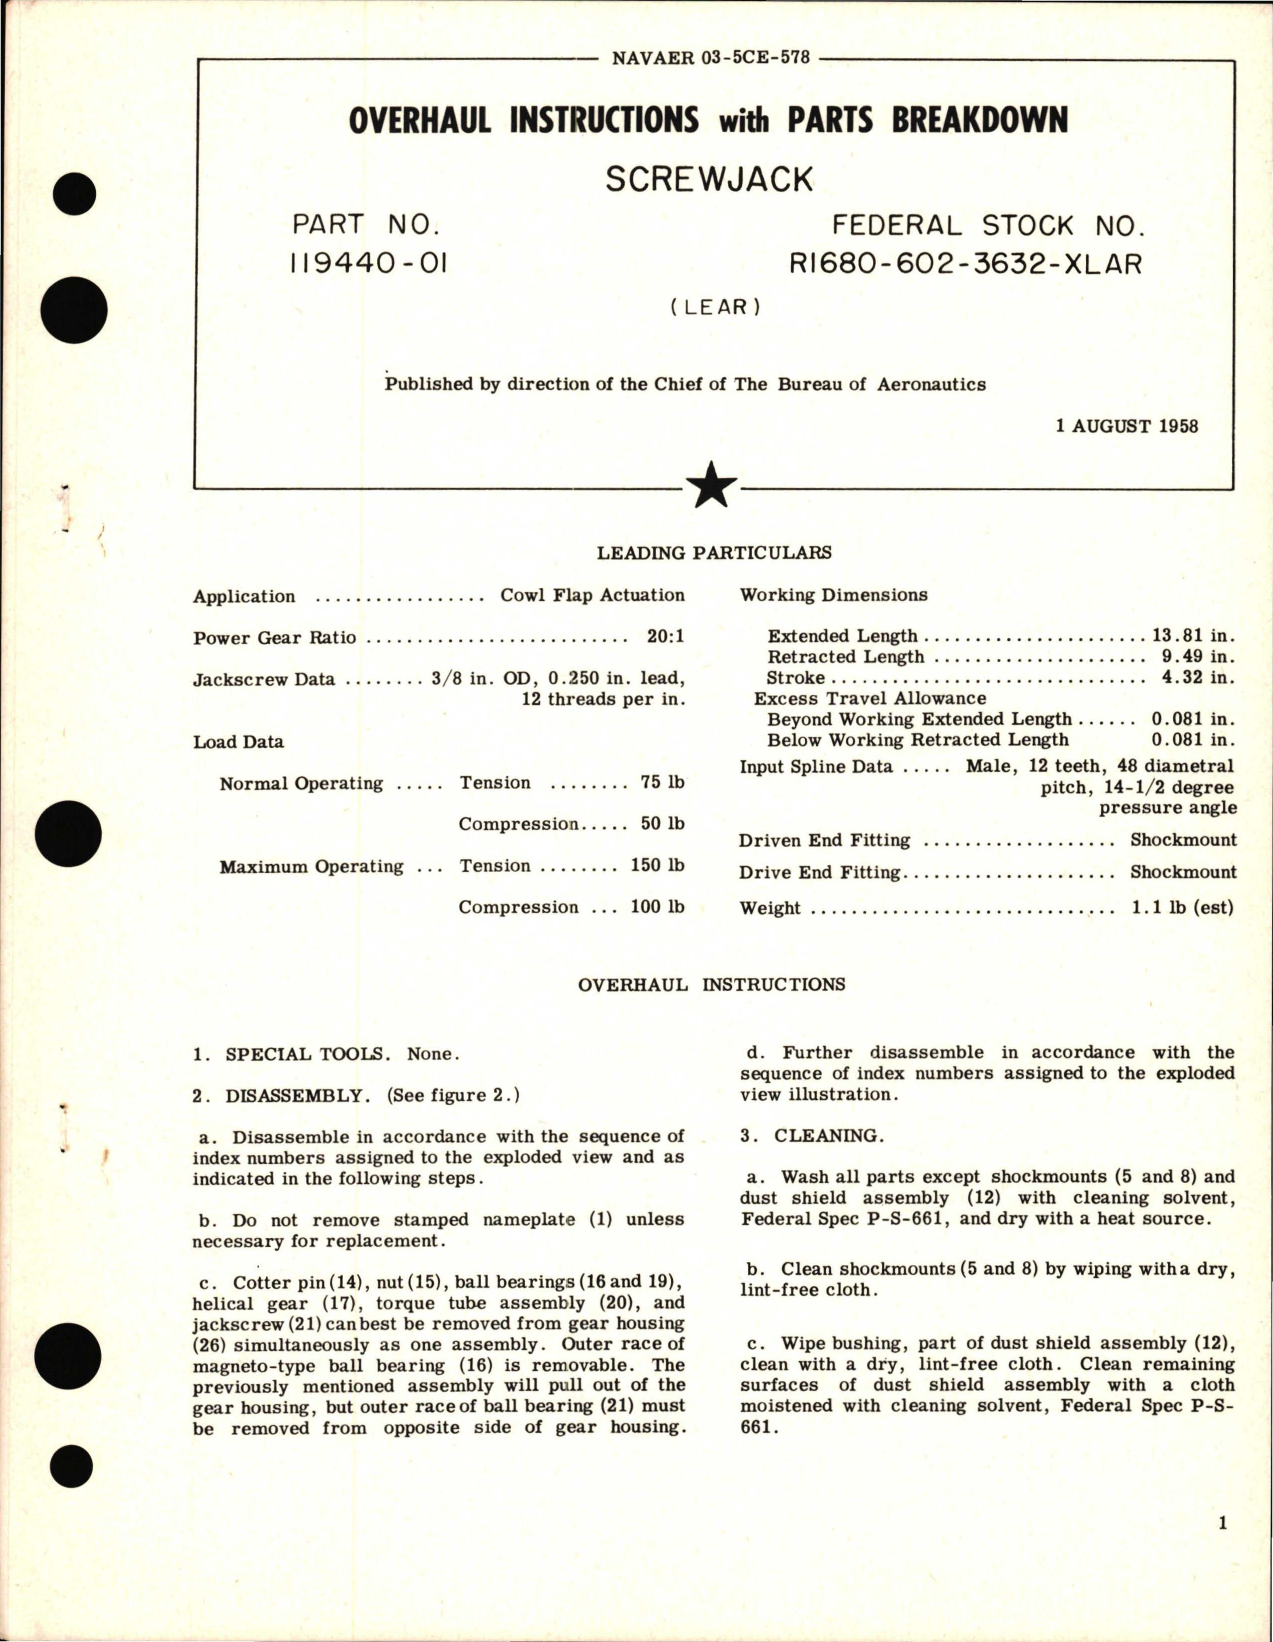 Sample page 1 from AirCorps Library document: Overhaul Instructions with Parts Breakdown for Screwjack - Part 119440-01 